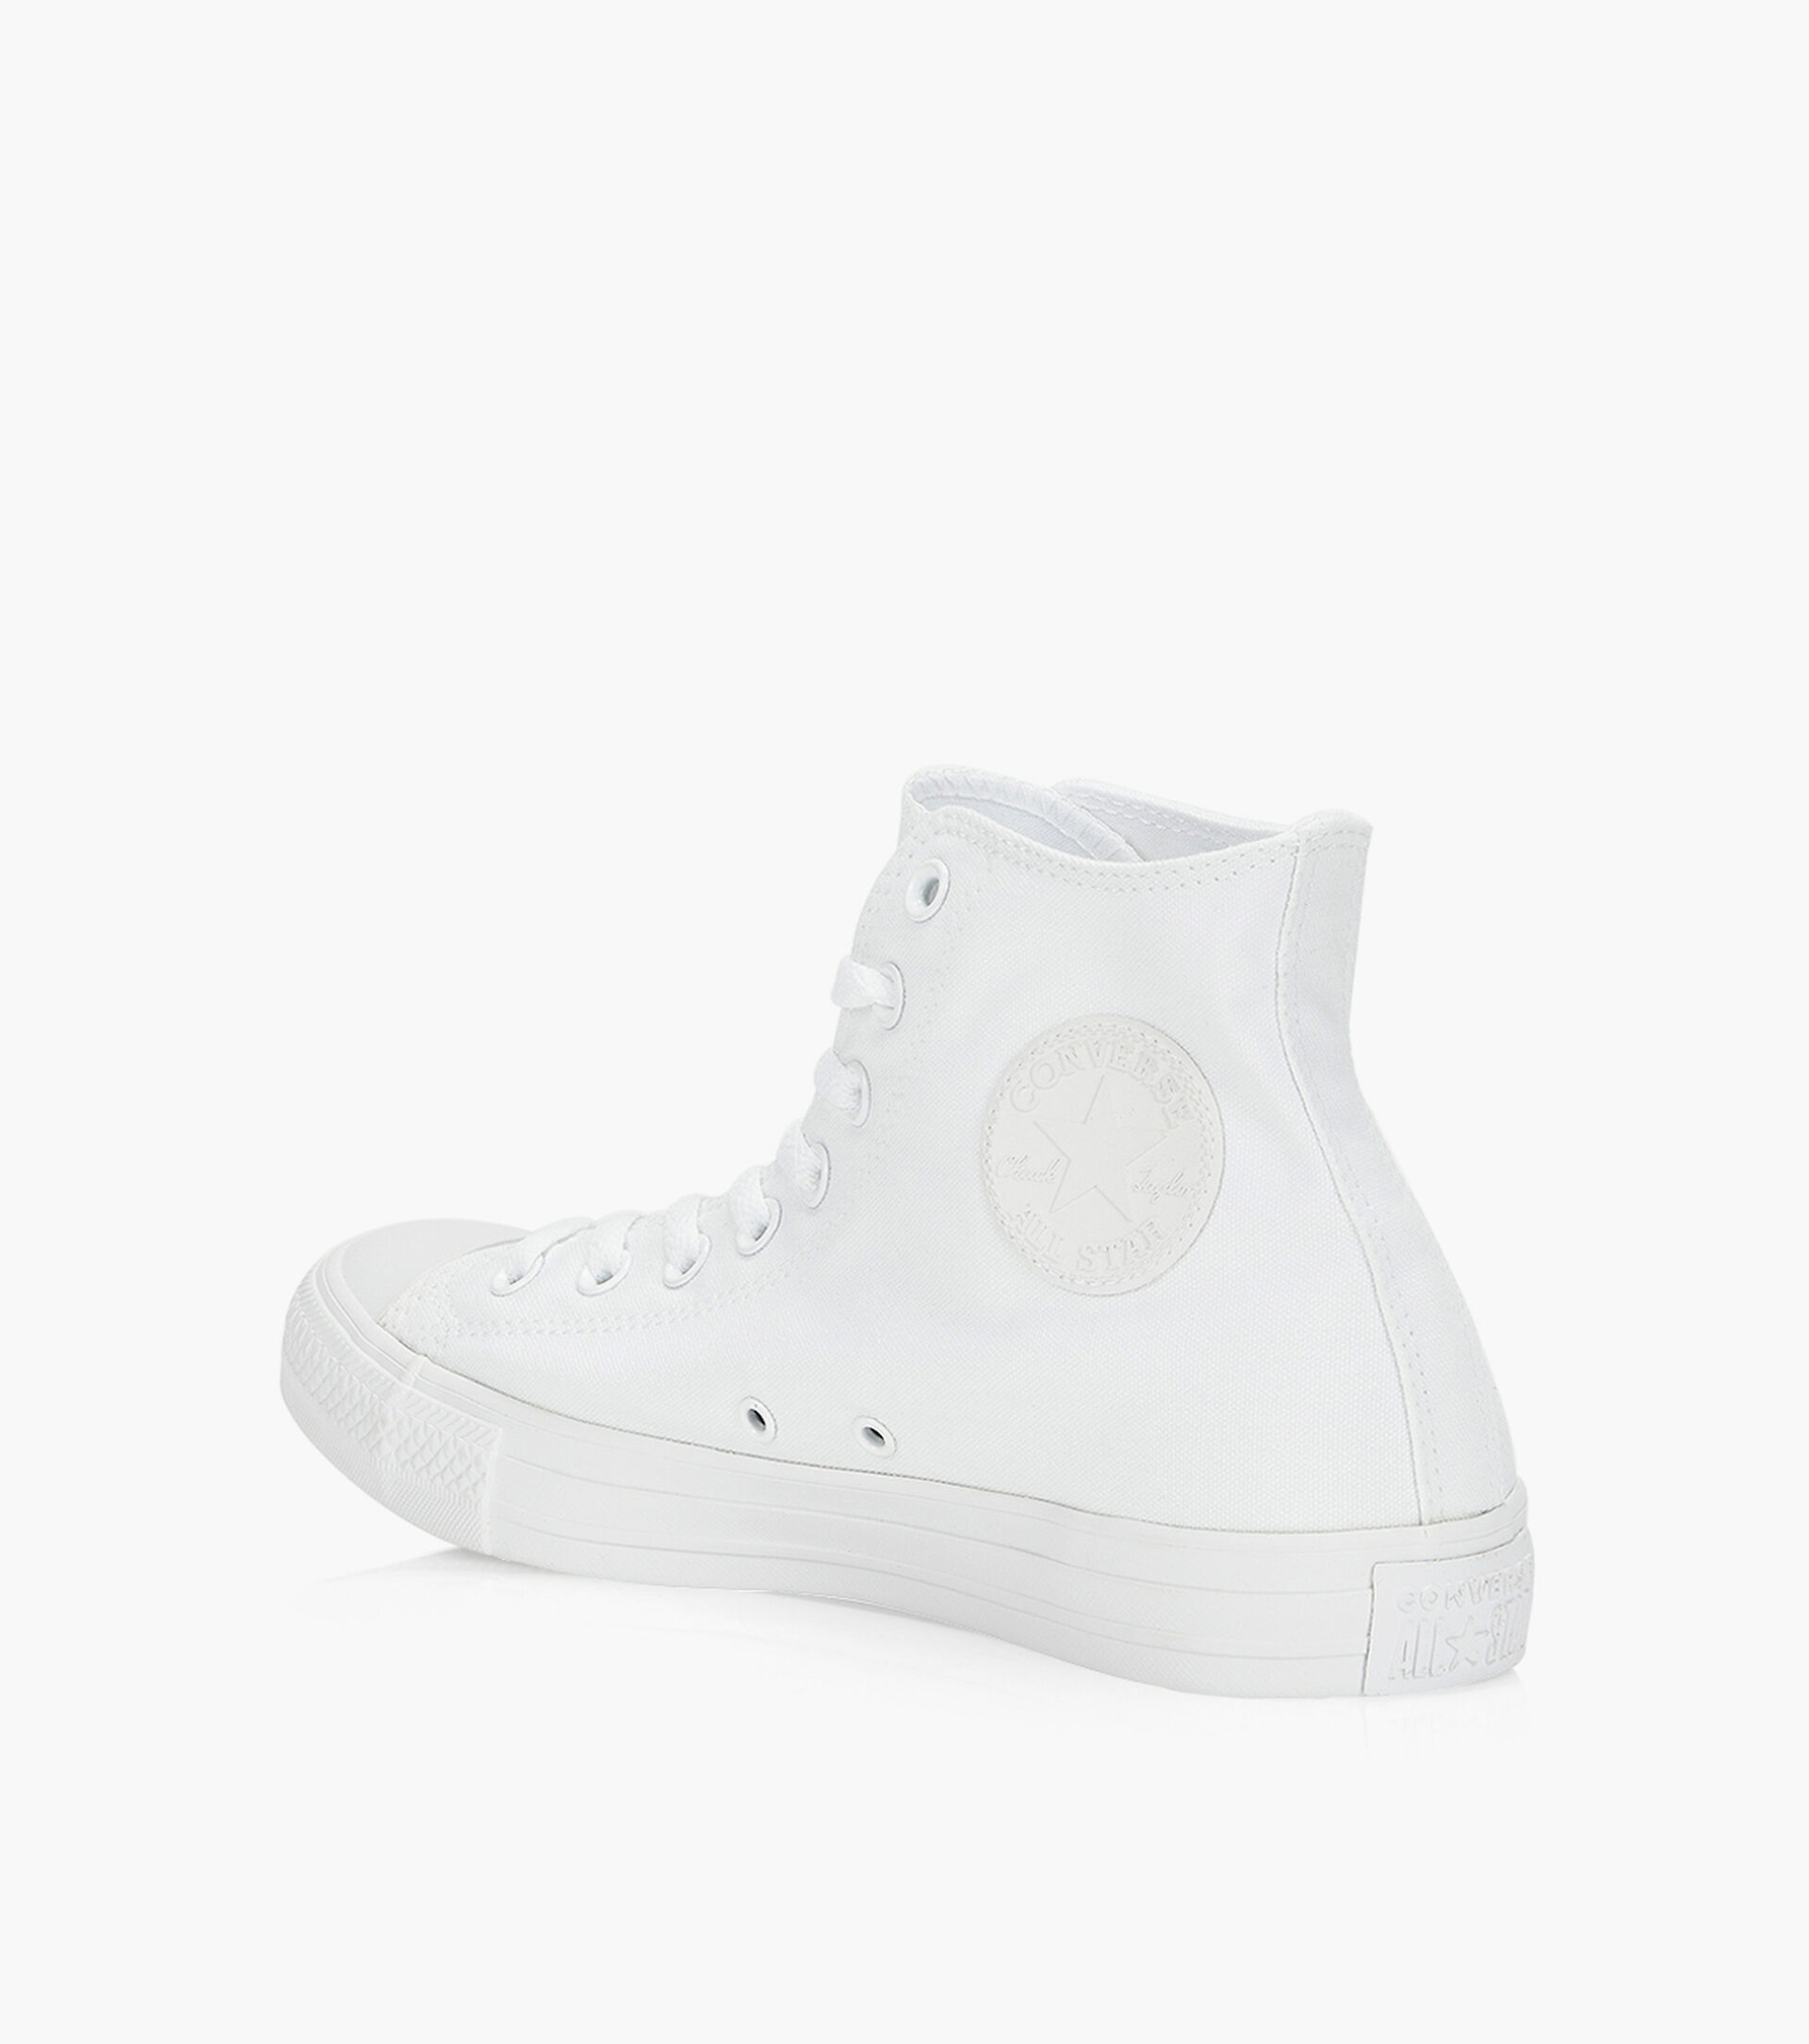 CONVERSE CHUCK TAYLOR ALL STAR MONO HIGH TOP - Fabric | Browns Shoes